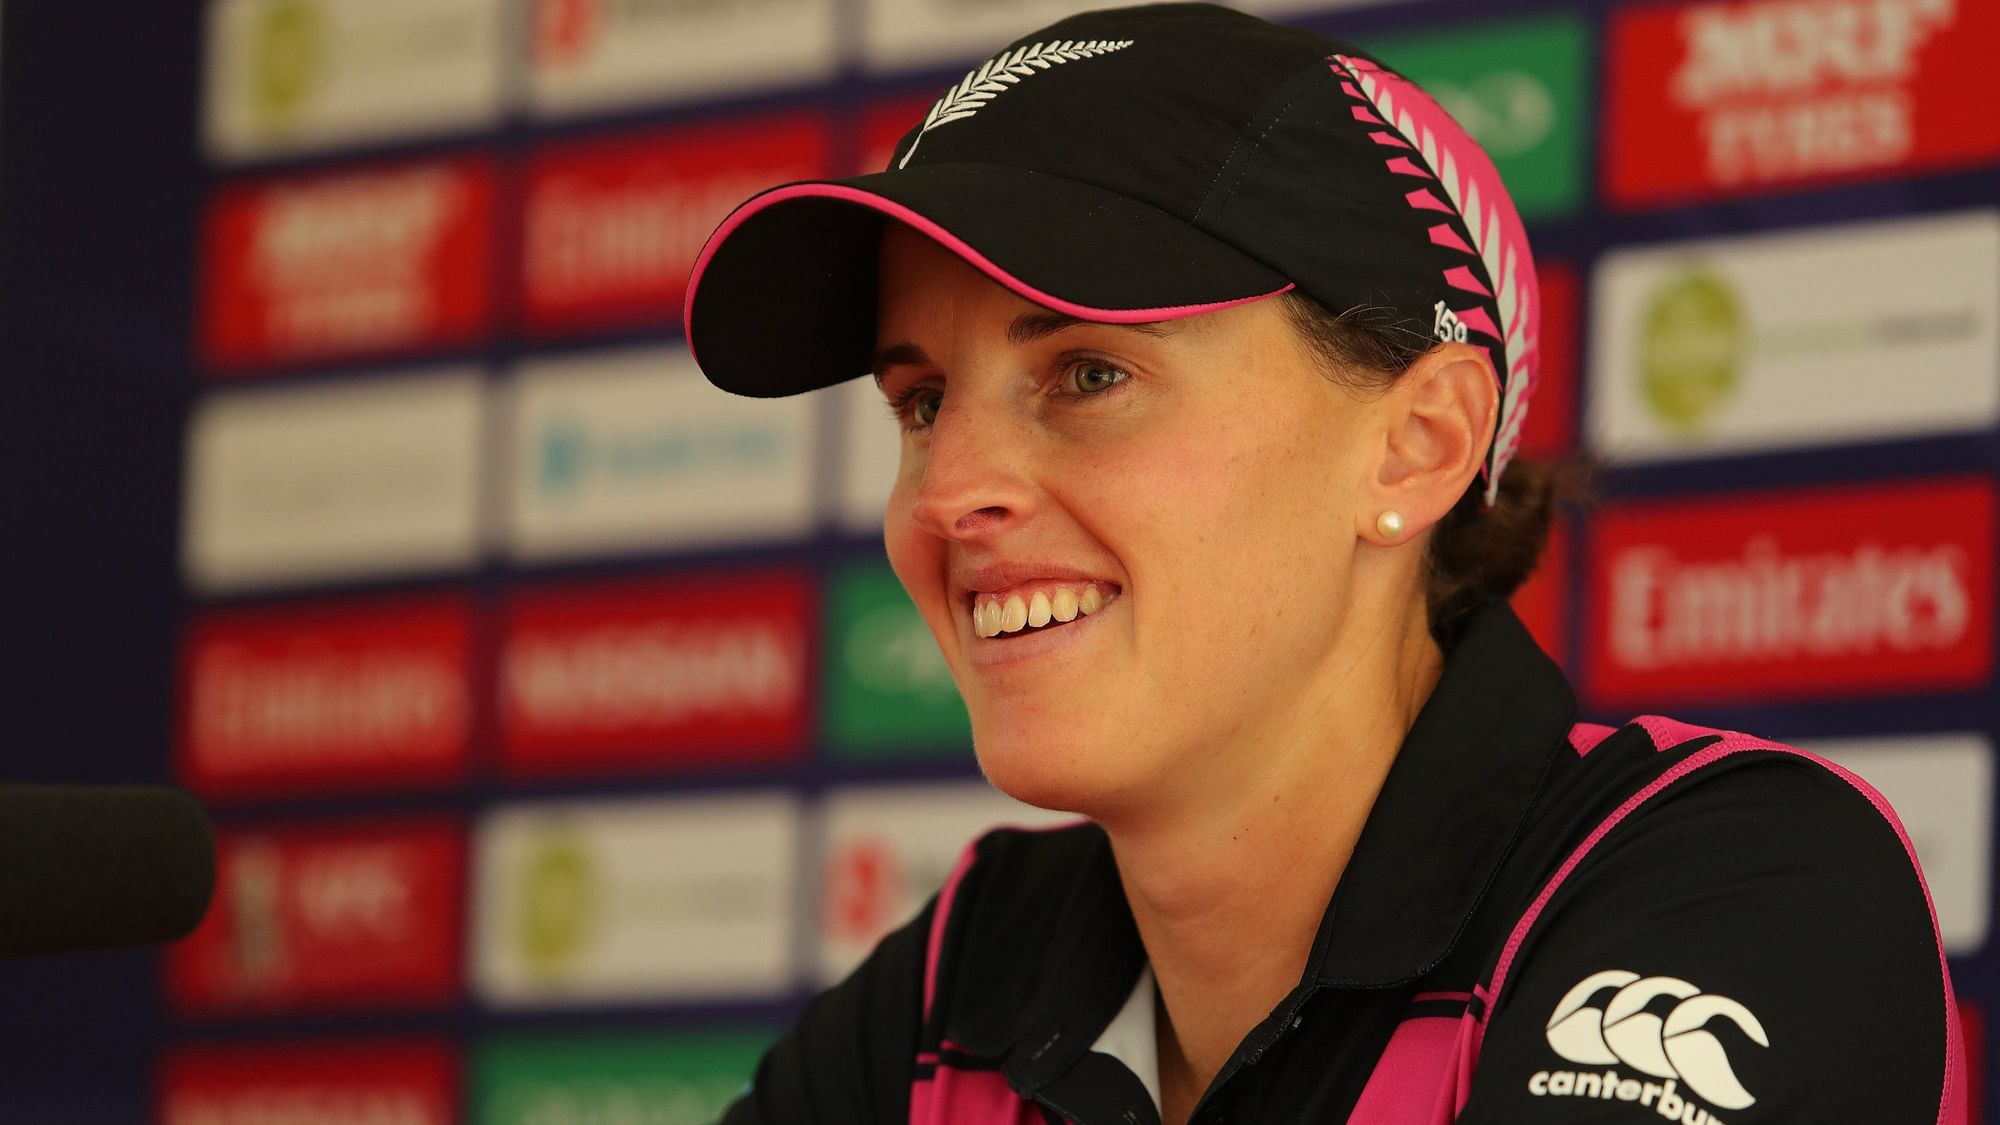 Satterthwaite will retain her contract for 2019-20 as per the new pregnancy leave policy of New Zealand Cricket.